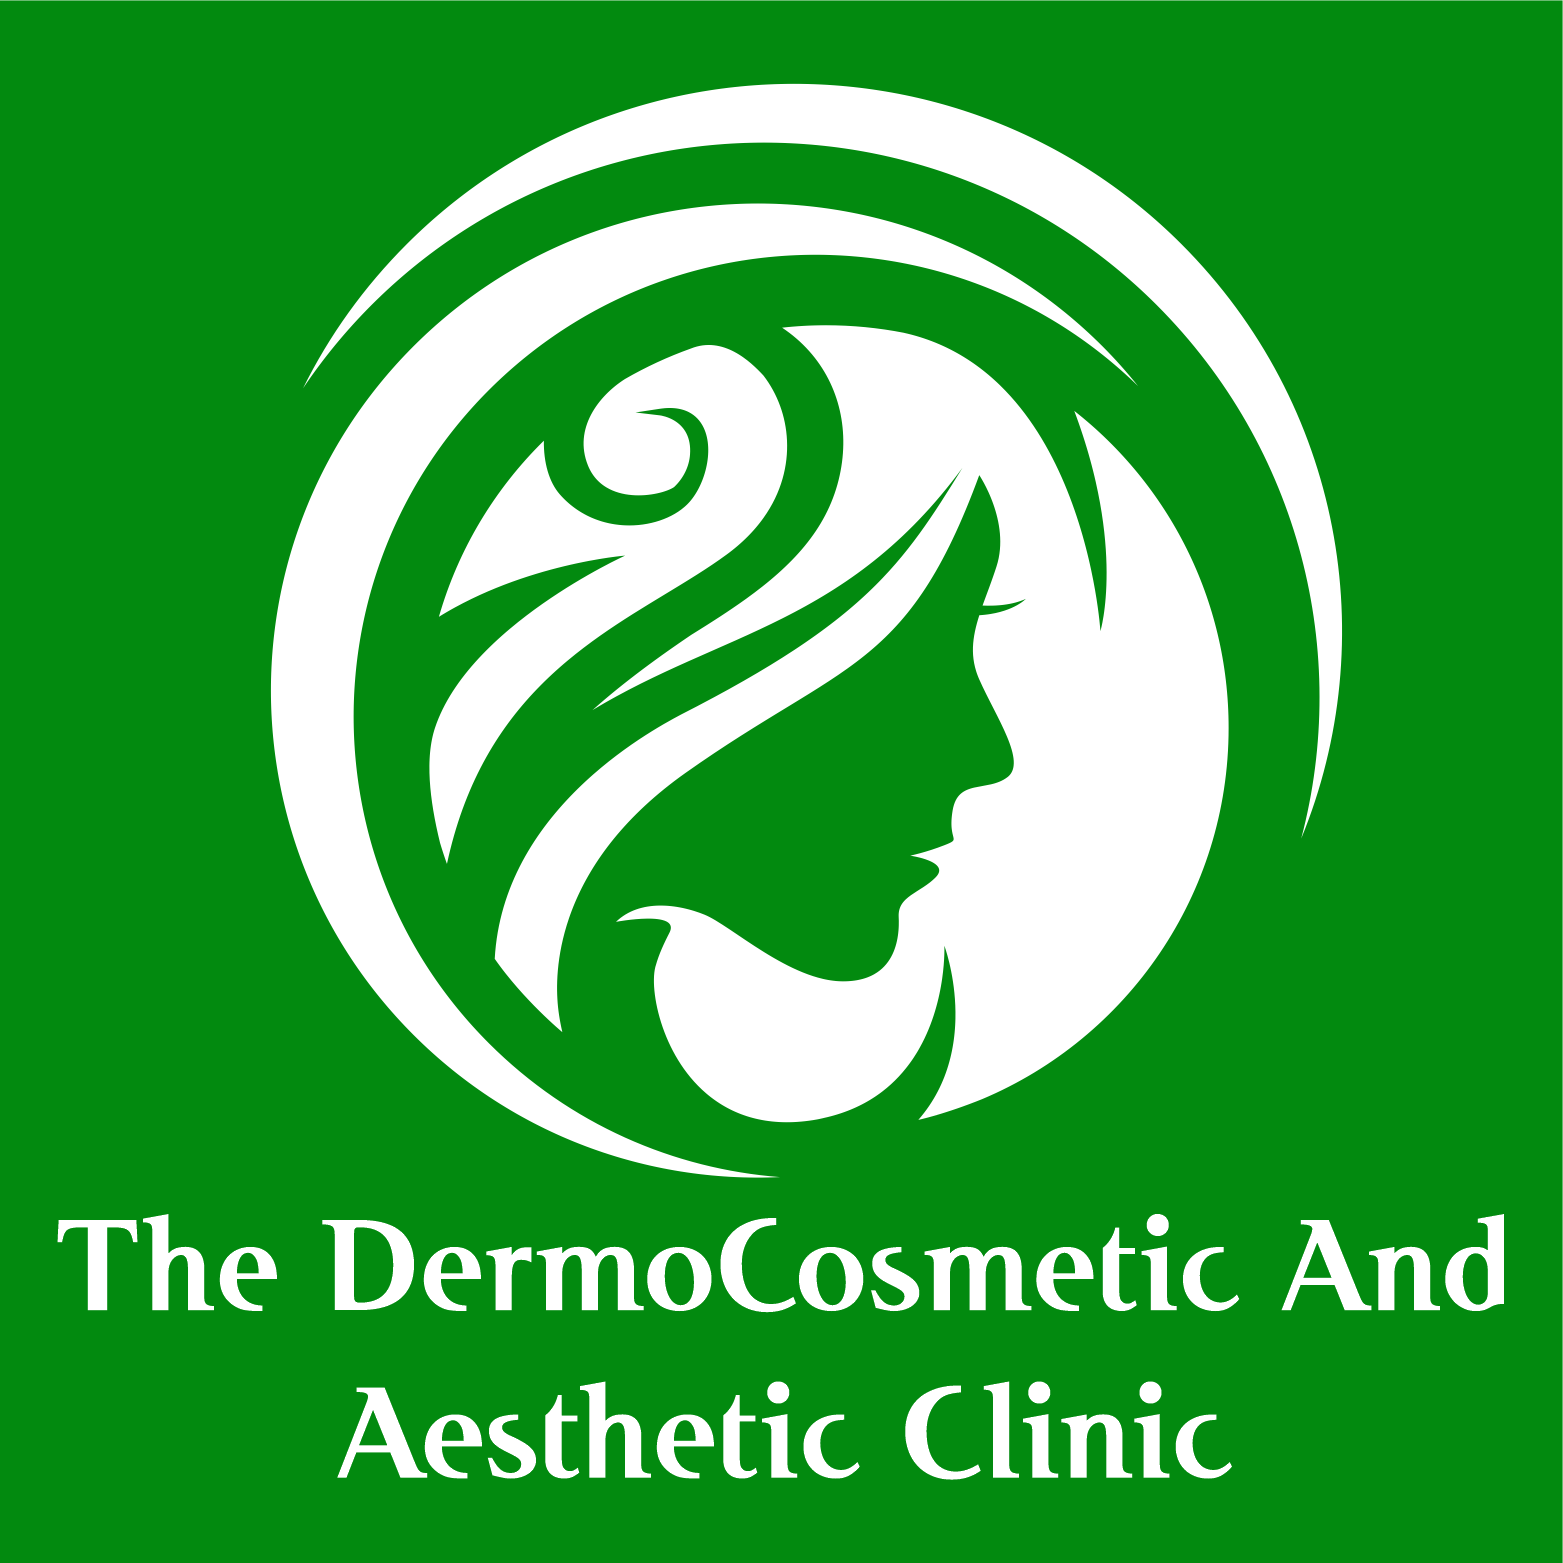 The Dermo Cosmetic And Aesthetic Clinic